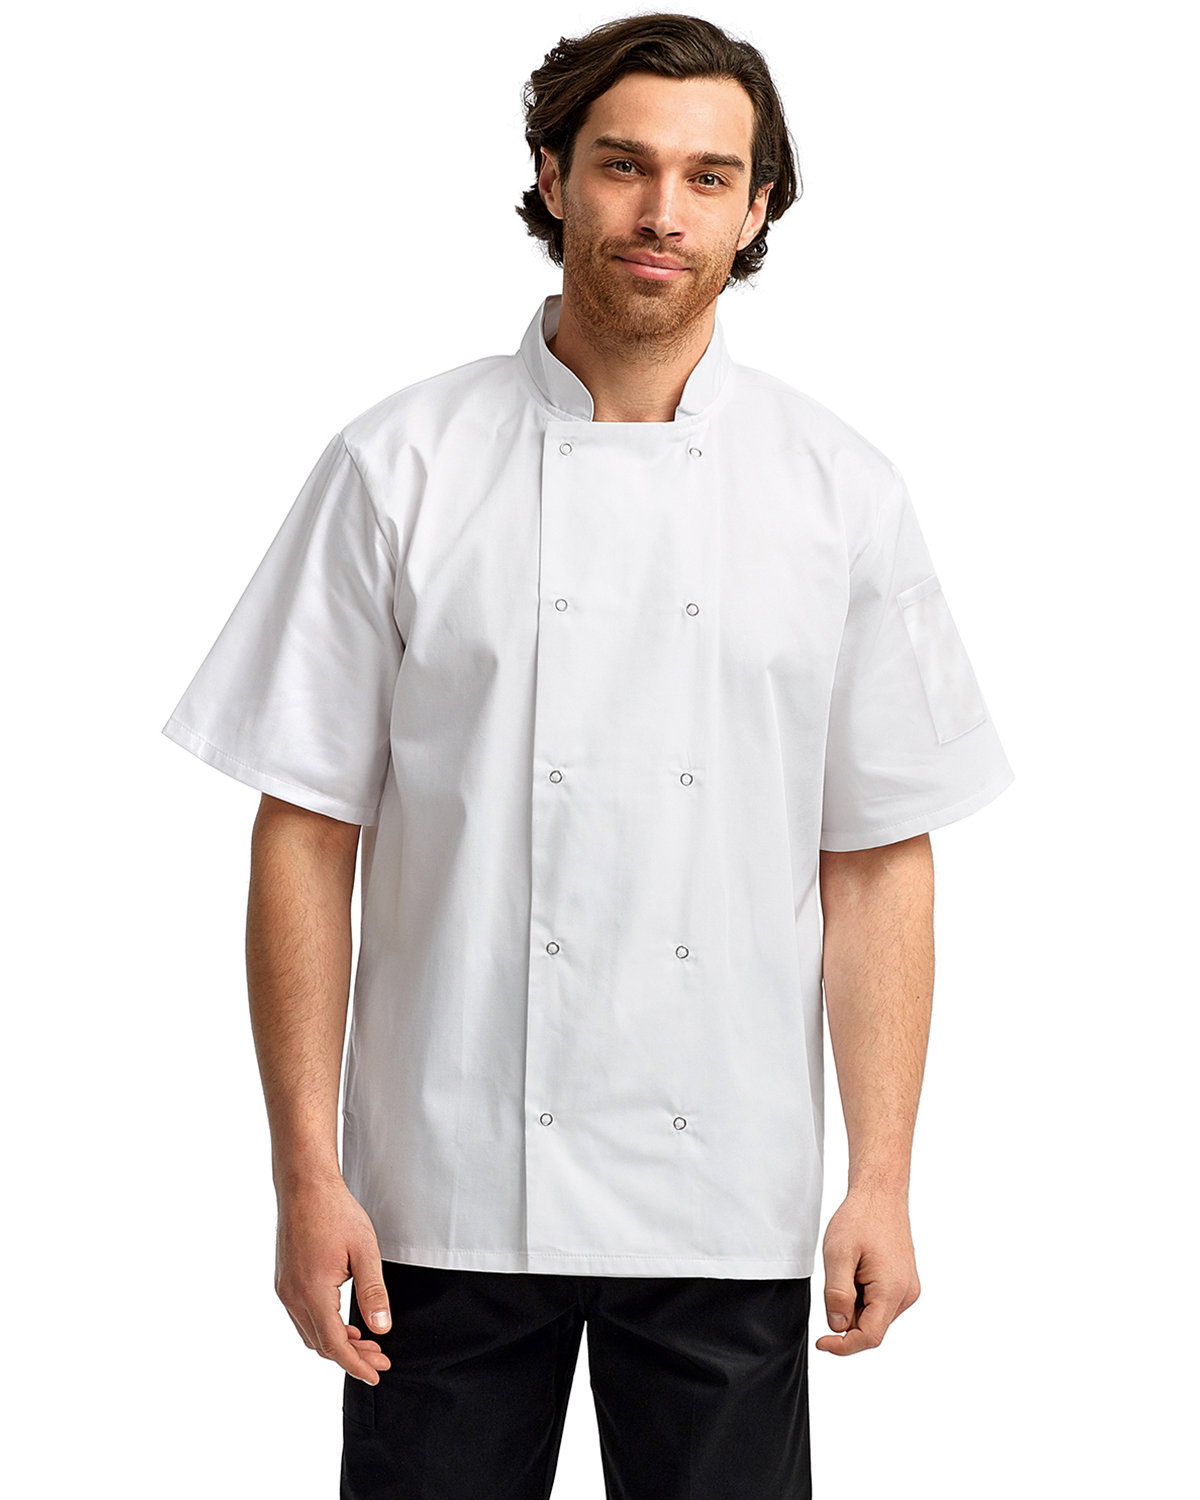 Artisan Collection by Reprime Unisex Studded Front Short-Sleeve Chef's Jacket WHITE 